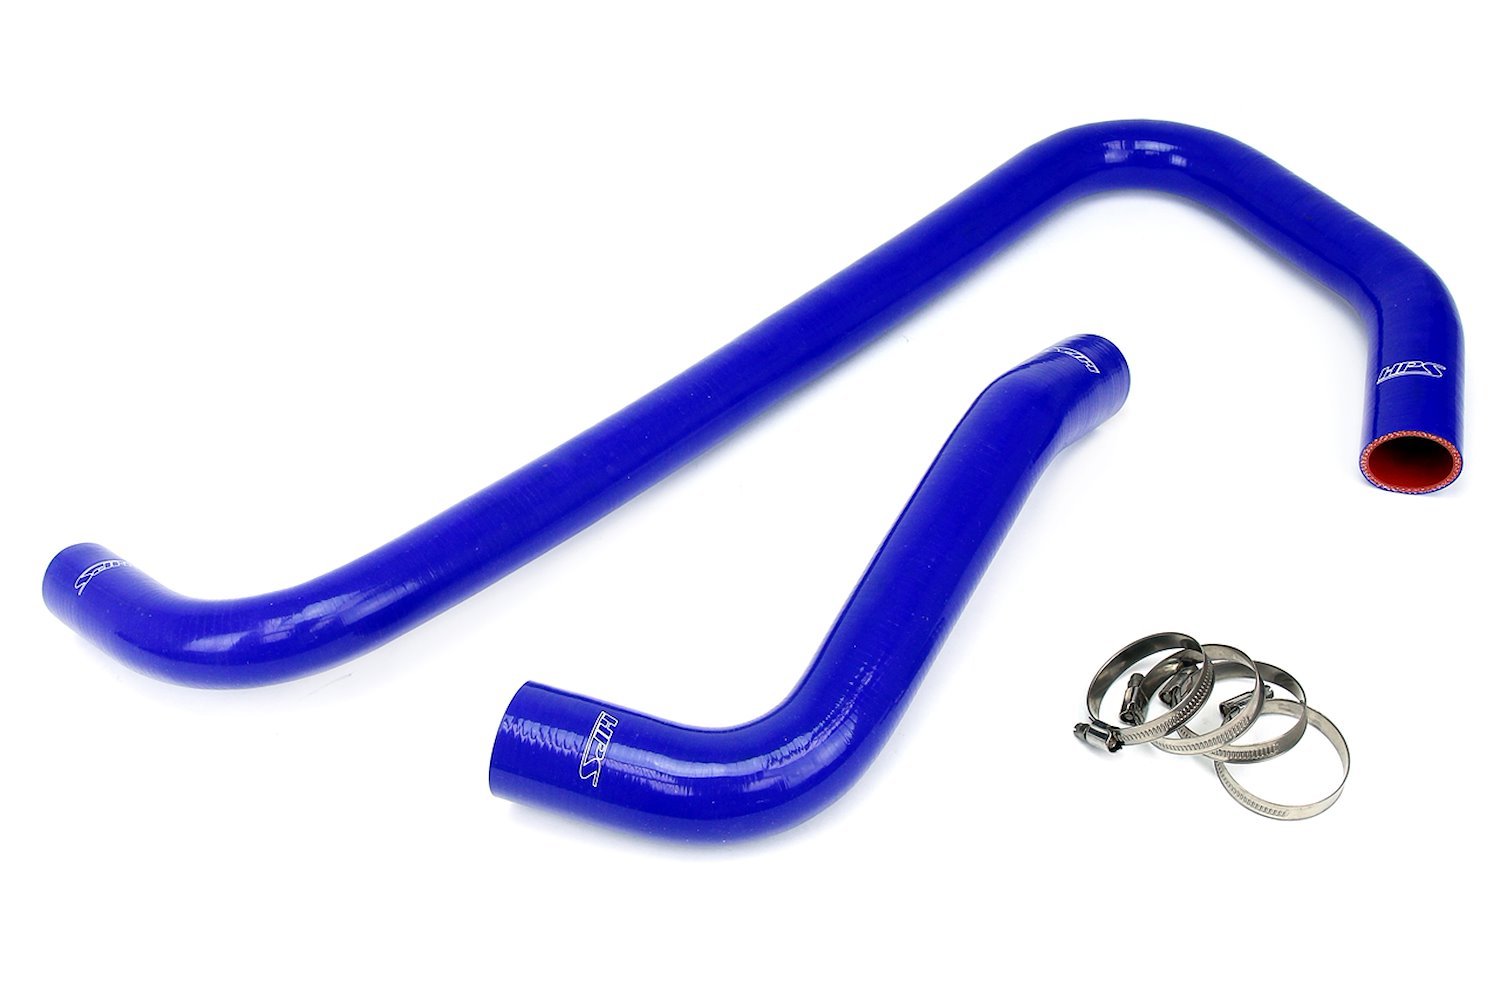 57-1307-BLUE Radiator Hose Kit, High-Temp 3-Ply Reinforced Silicone, Replace OEM Rubber Radiator Coolant Hoses